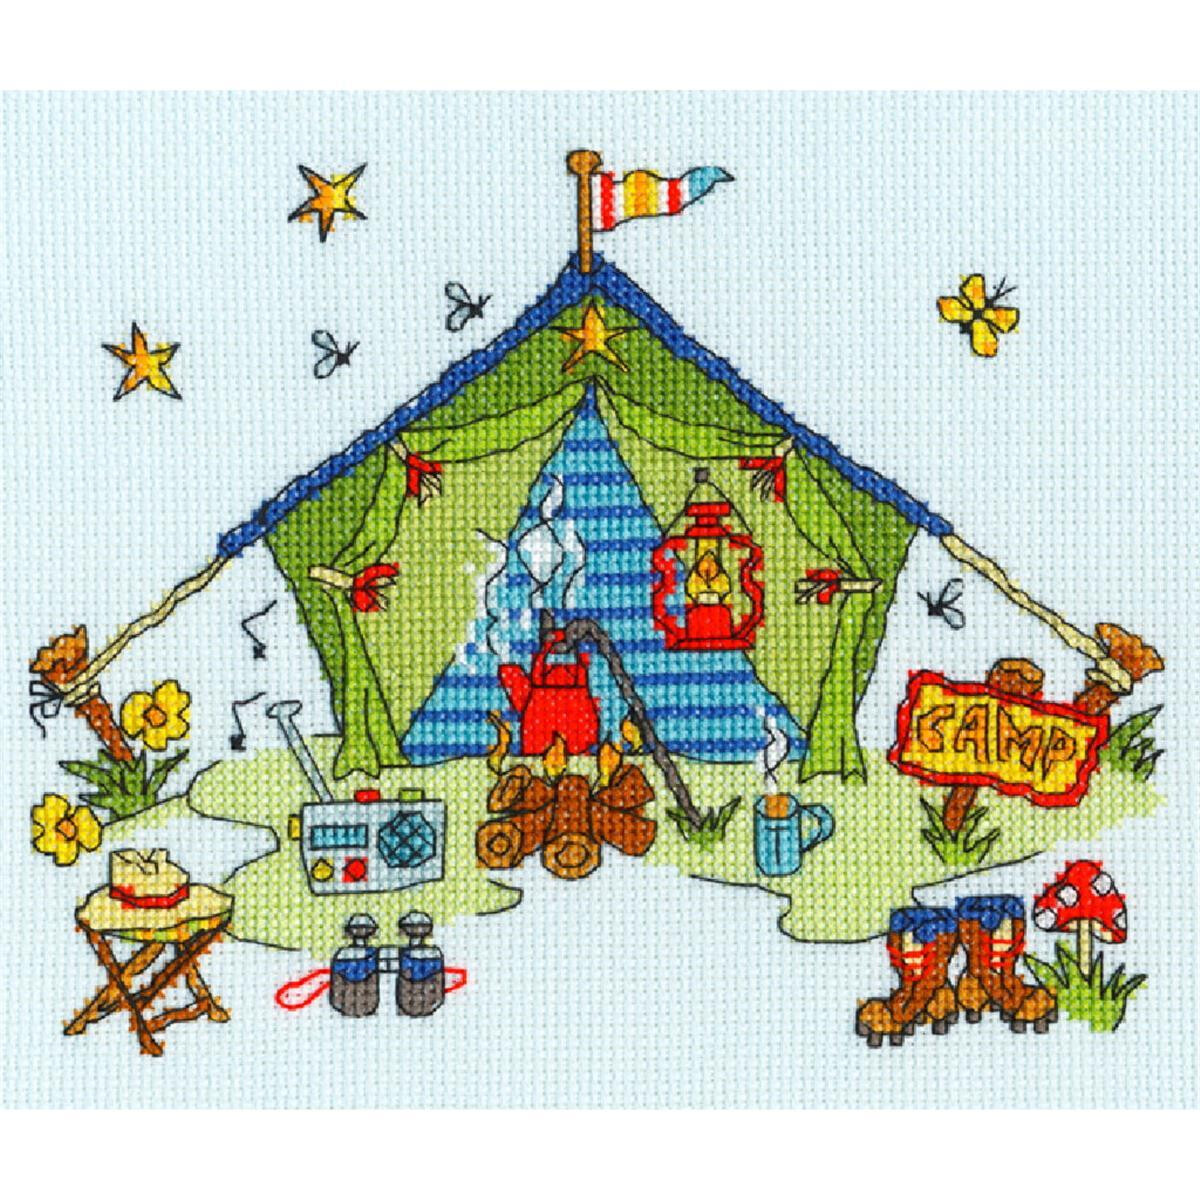 A colorful embroidery illustration of a camping scene...